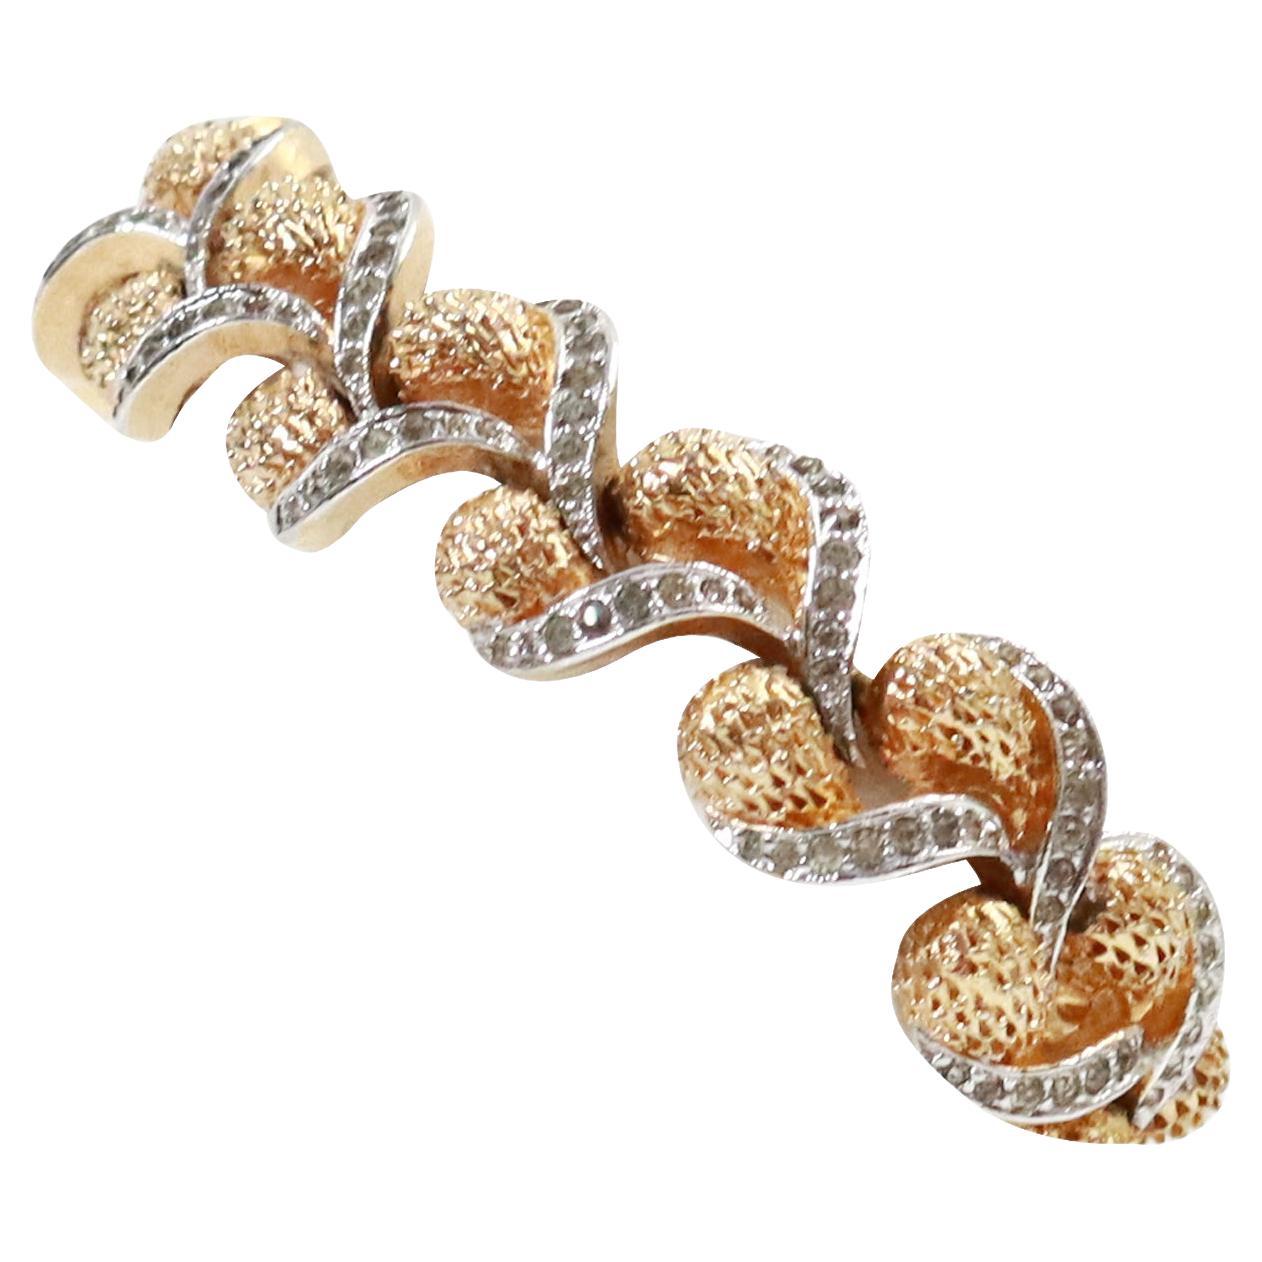 Vintage Panetta Gold Braided Bracelet with Clear Pave Stones Circa 1960s